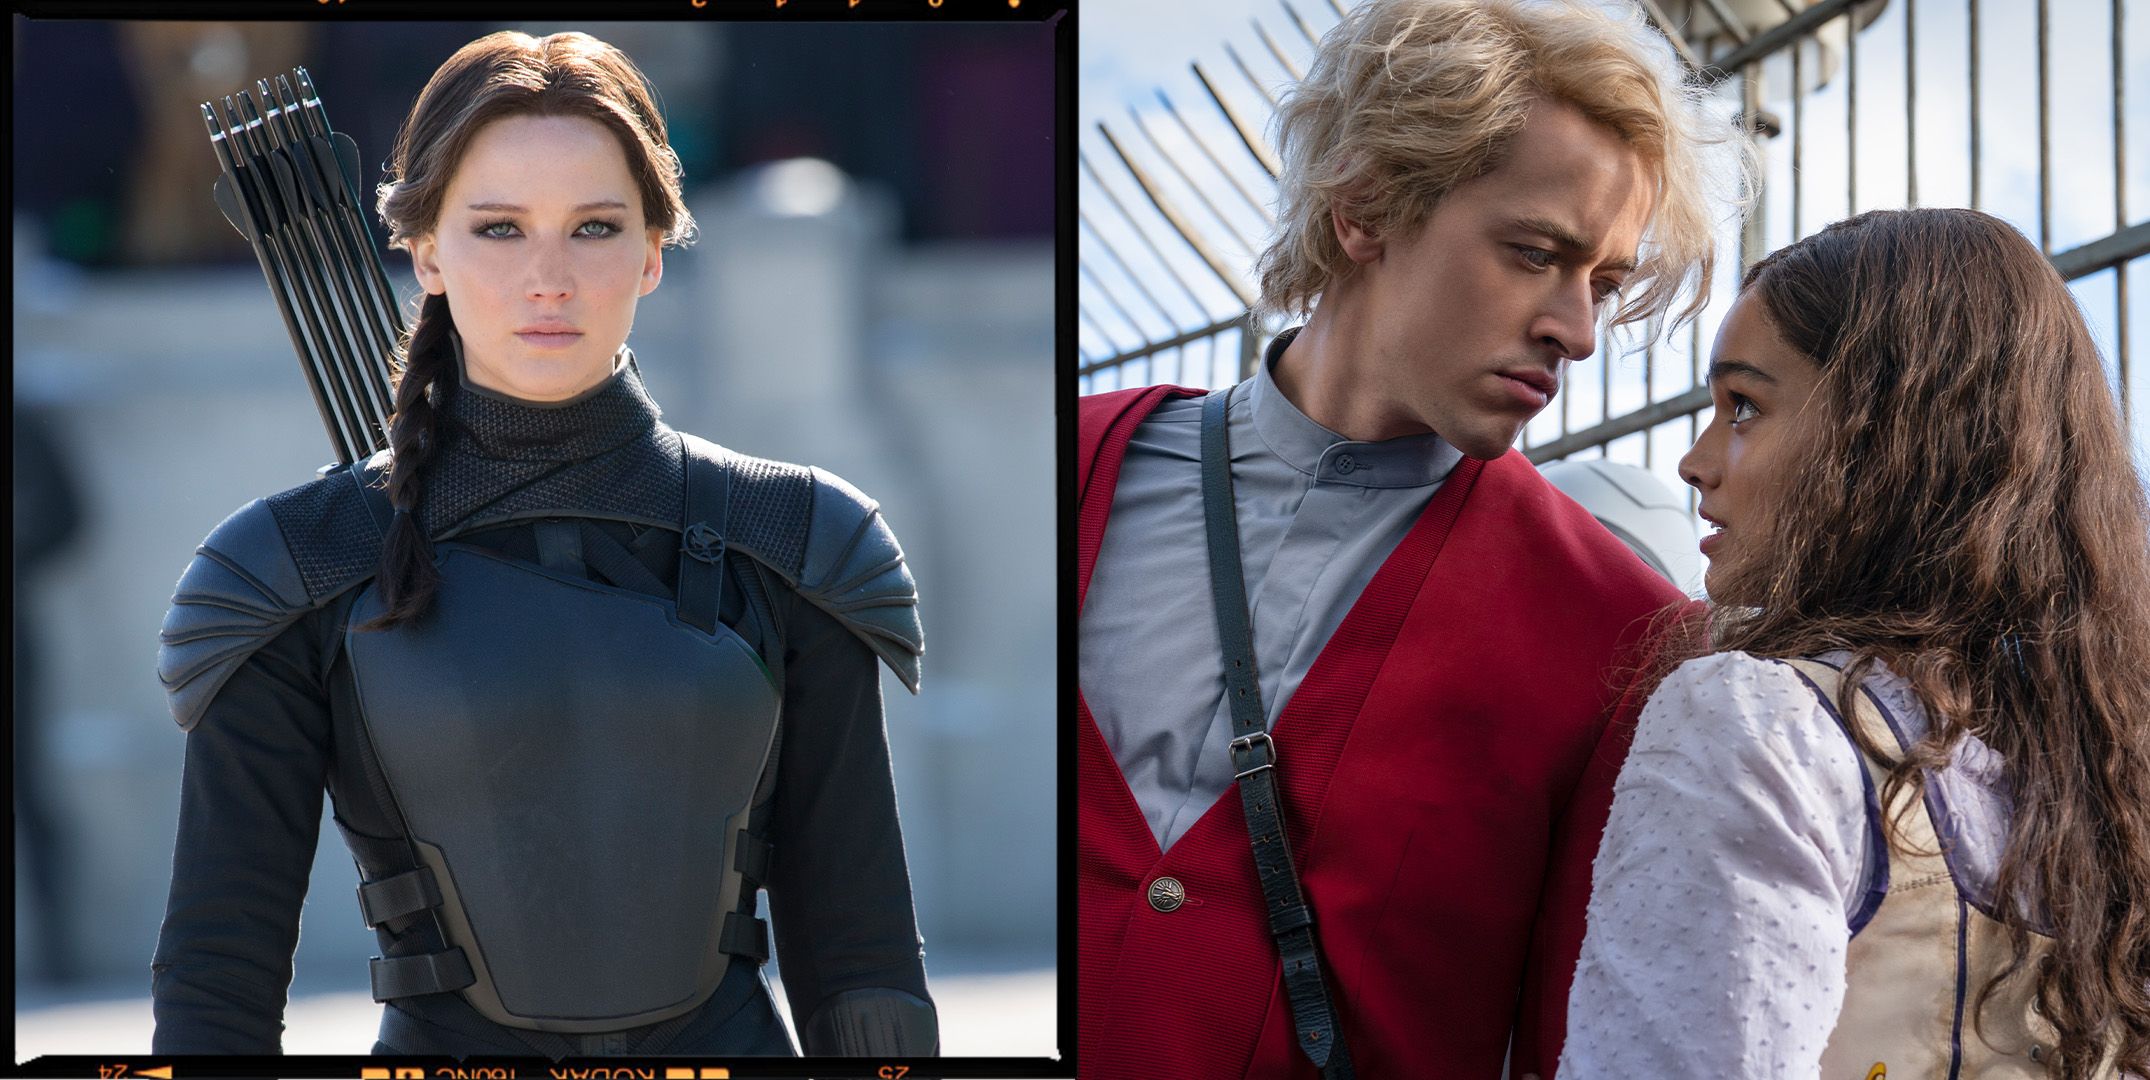 5. The Hunger Games: Mockingjay - Part 2 (2015)